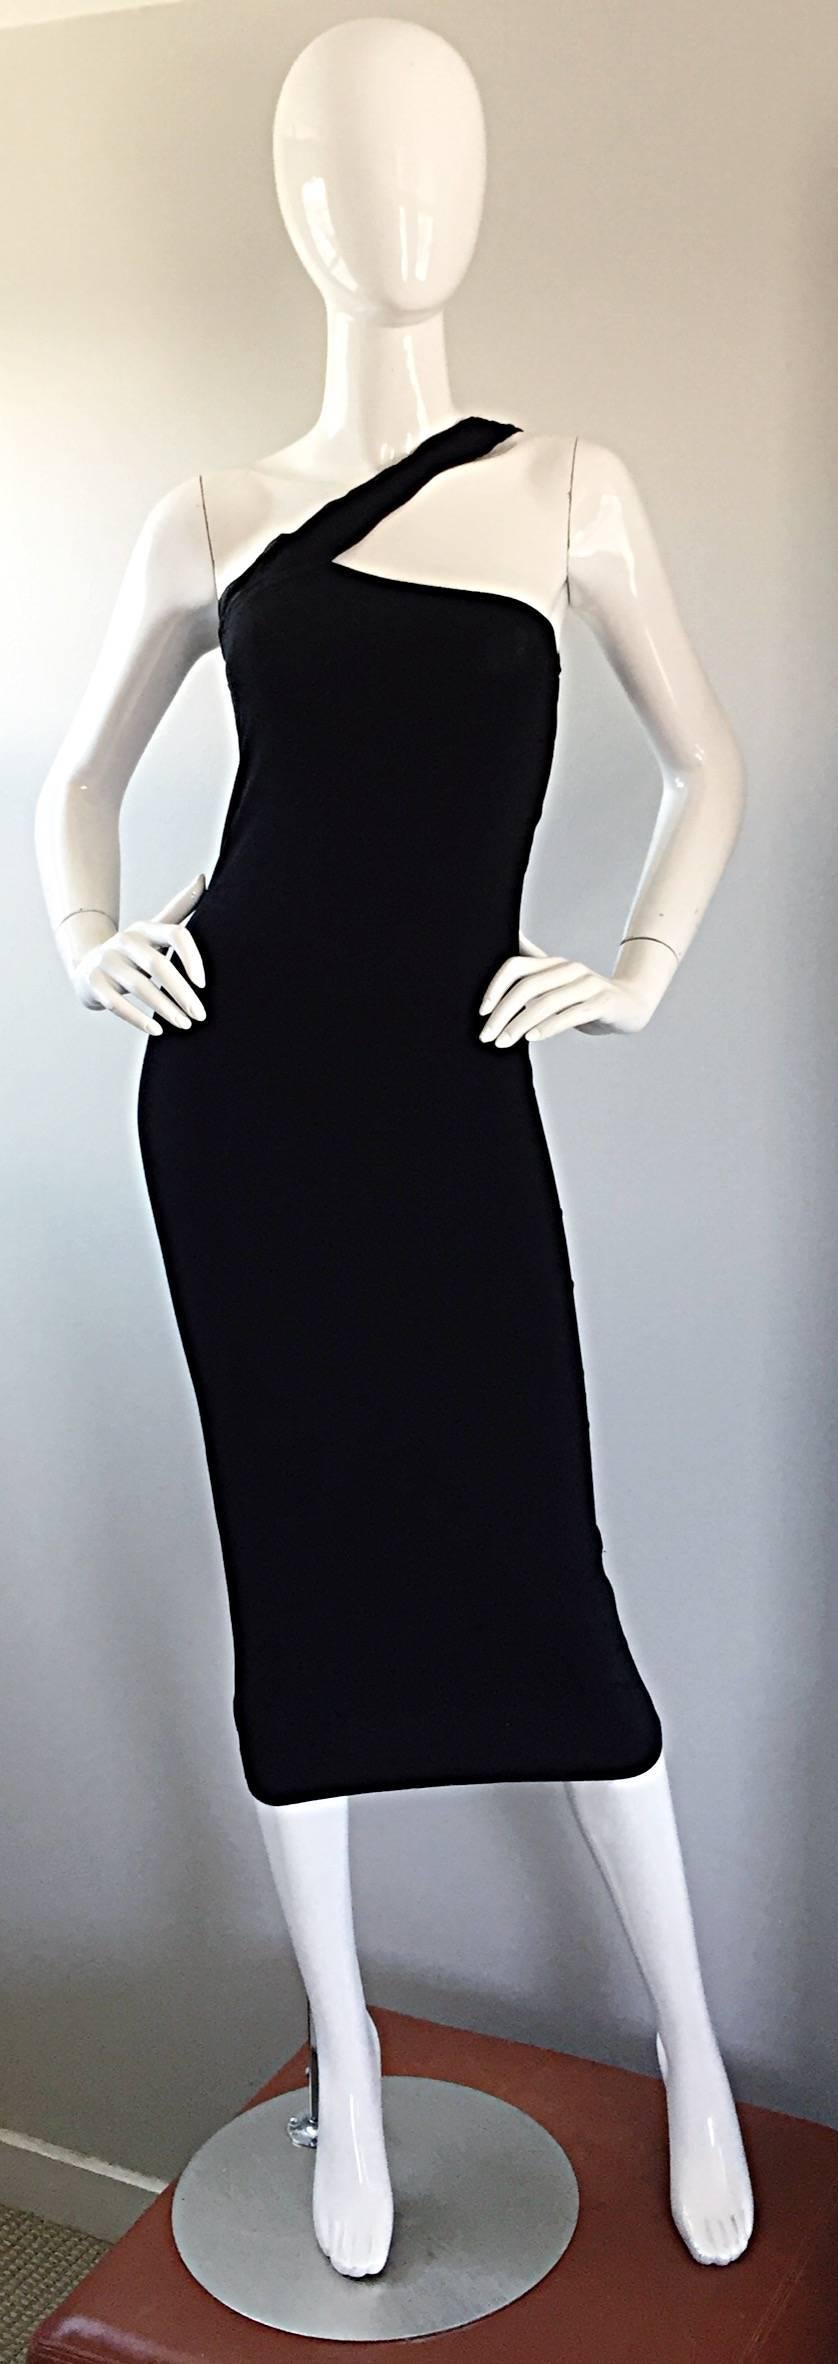 Incredibly sexy 1990s vintage ROMEO GIGLI black rayon jersey one-shoulder dress! Amazing bodcon fit that stretches to fit and hug the body in all the right places. Perfect below the knee hem. Important early 90s work from a master designer, whose